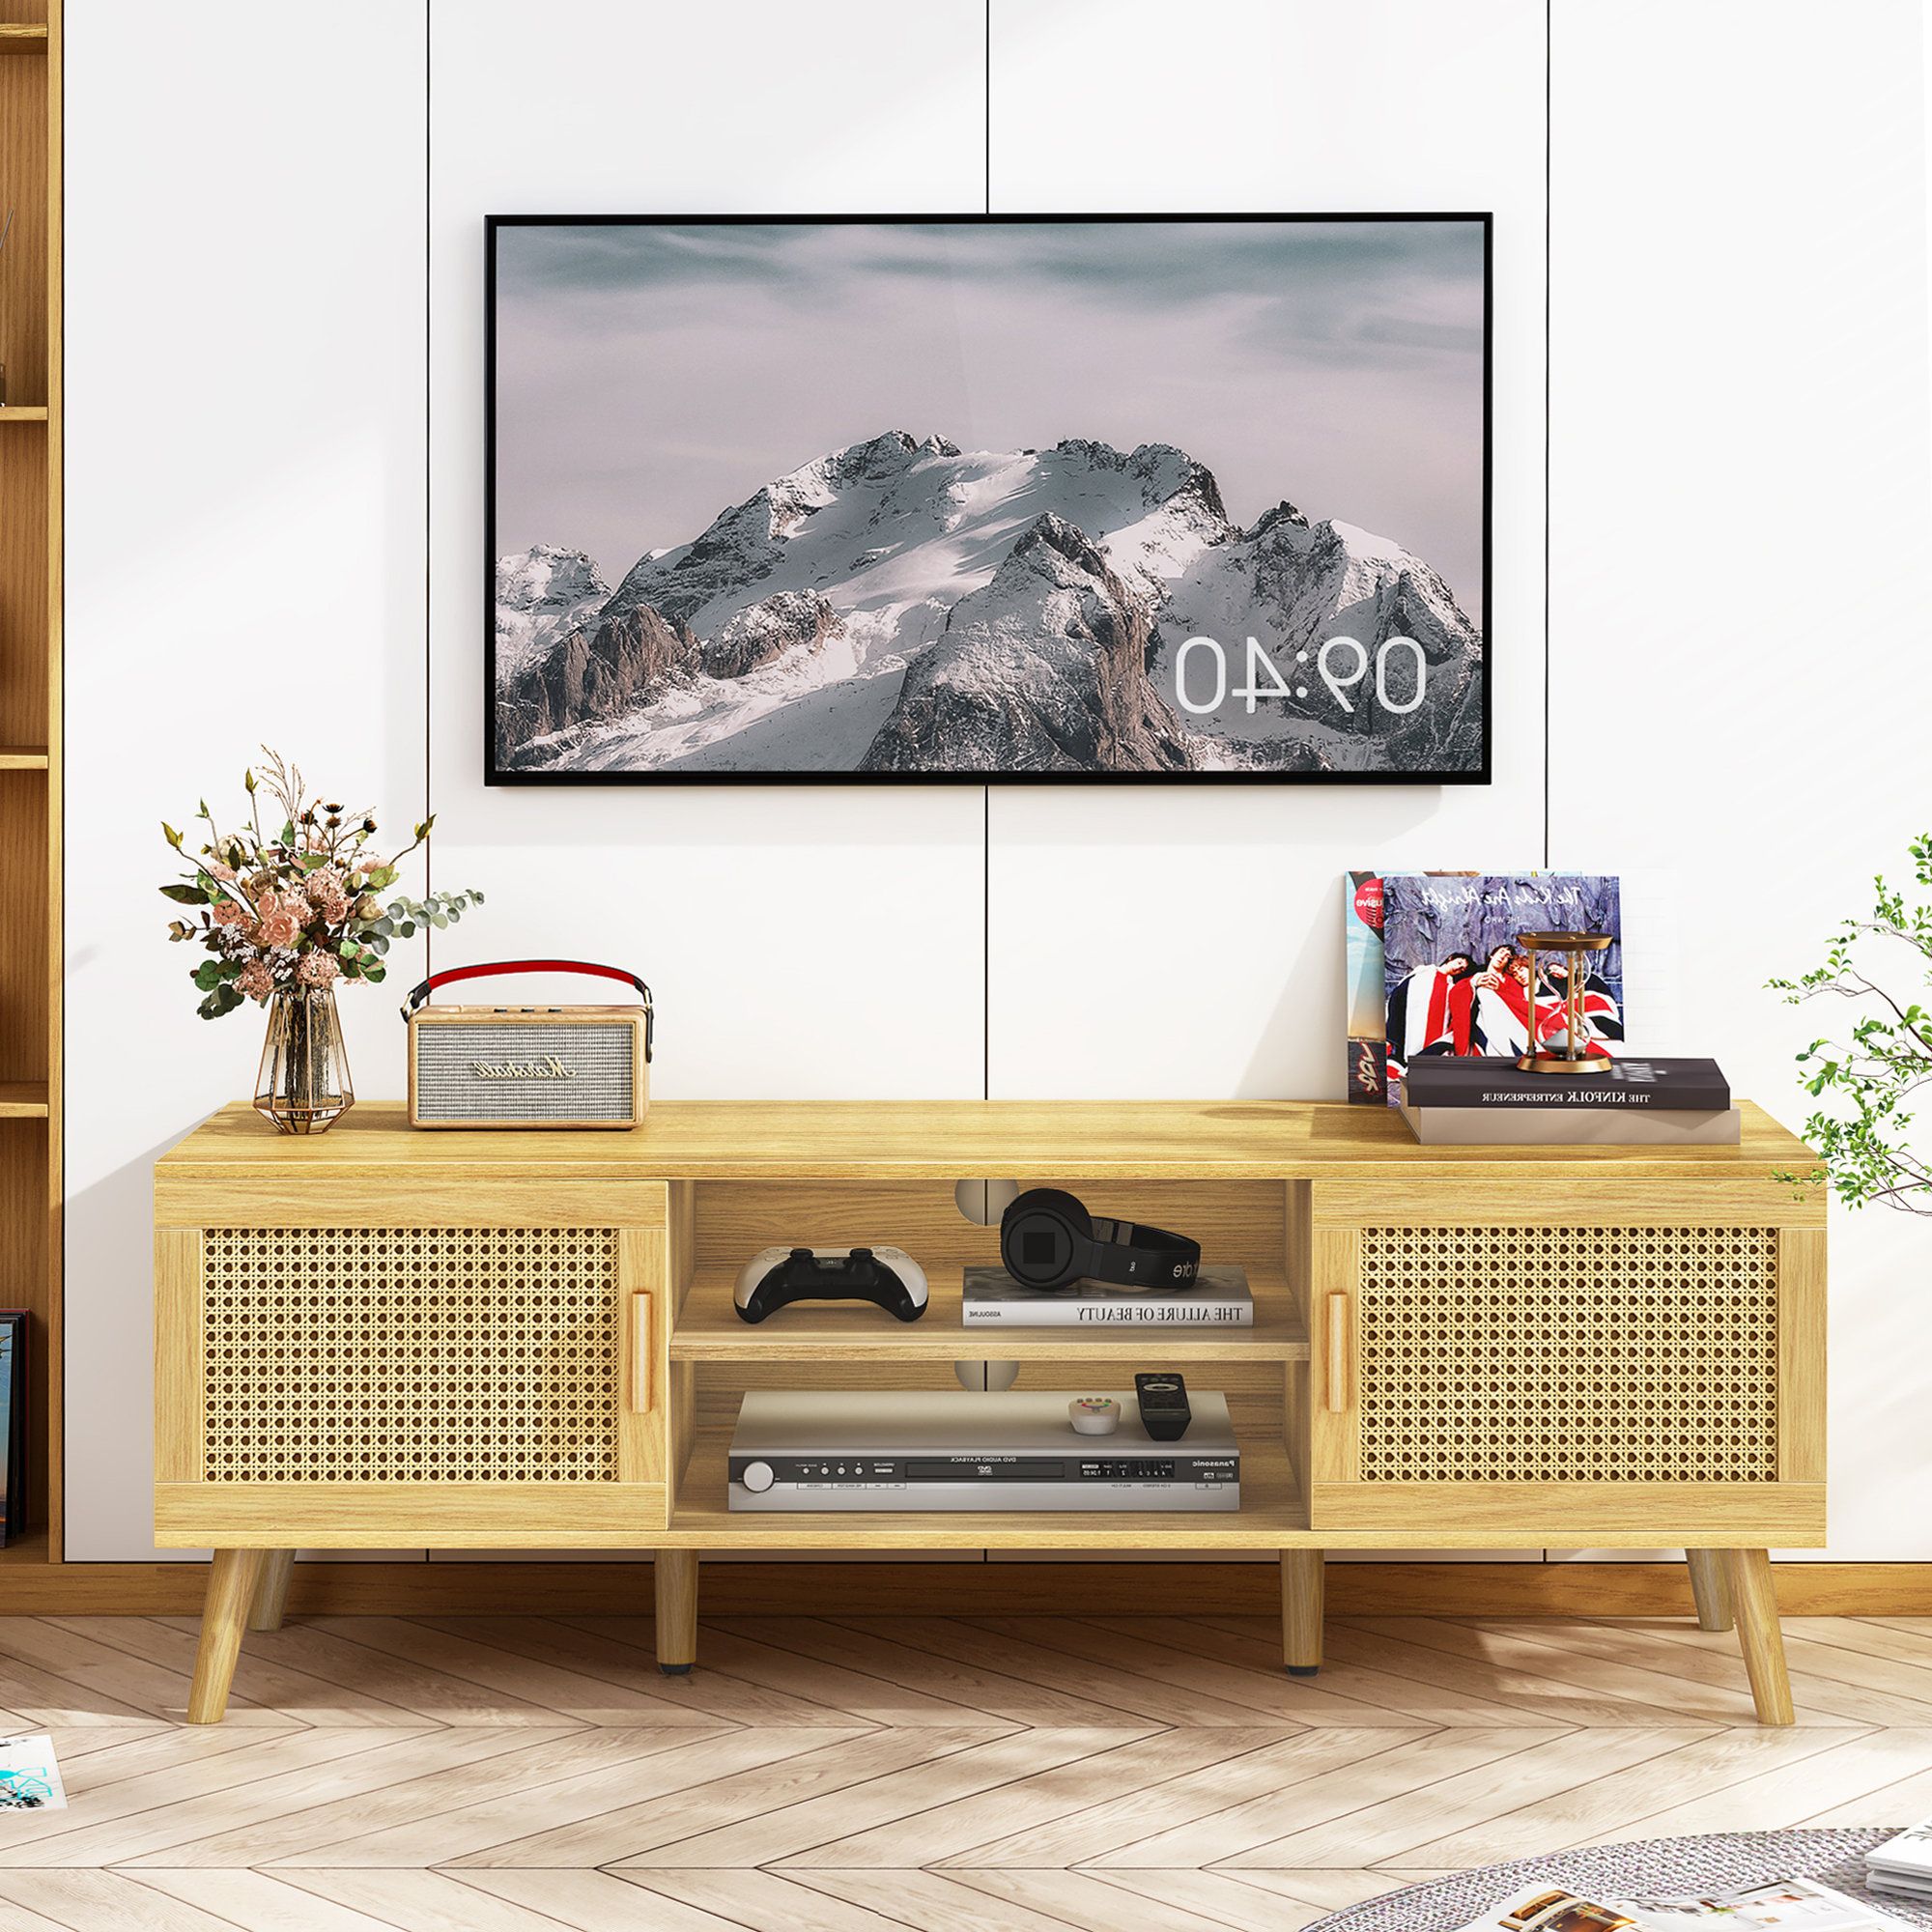 Bay Isle Home Tv Stand For 55 Inch Tv Entertainment Center Tv Console Table  With Adjustable Shelf And 2 Cabinets & Reviews | Wayfair Intended For Tier Stand Console Cabinets (View 14 of 20)